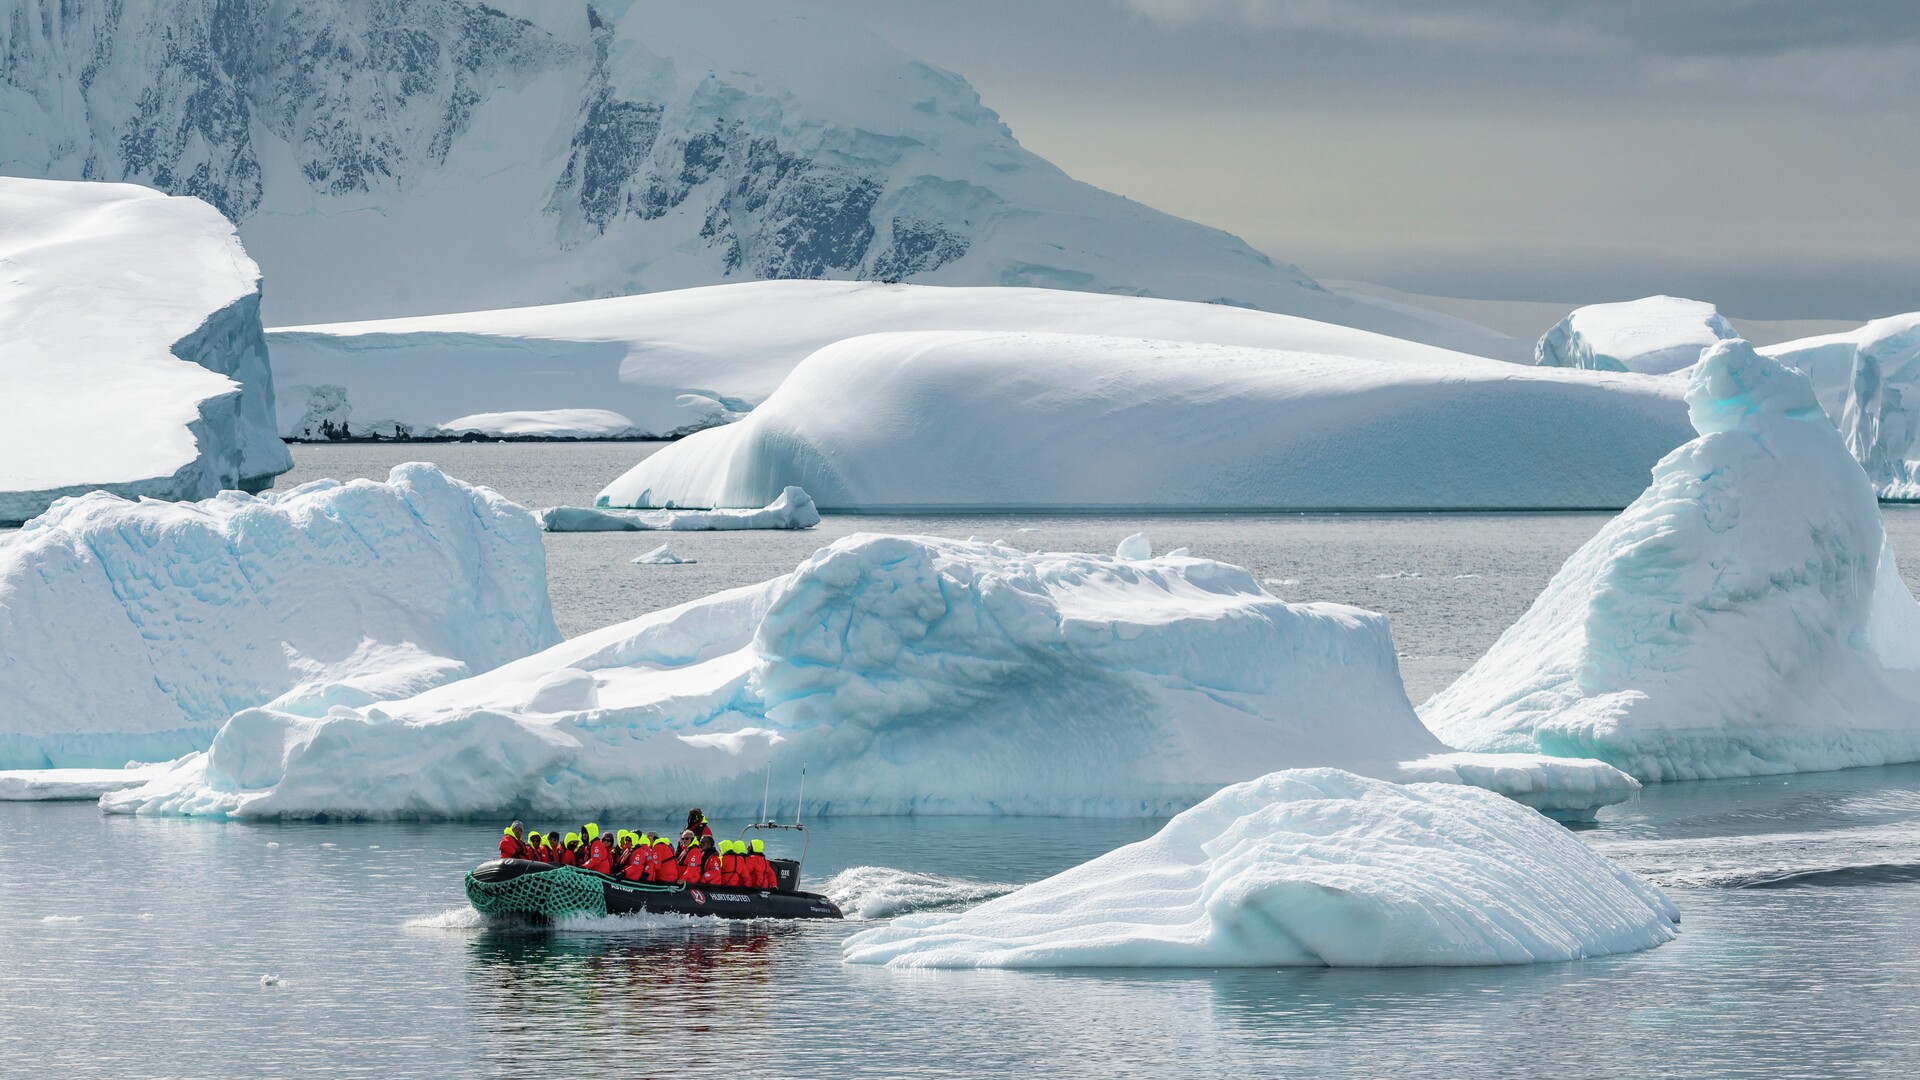 Save up to 15 per cent with Hurtigruten Expeditions' sale to Antarctica. But hurry sale ends soon